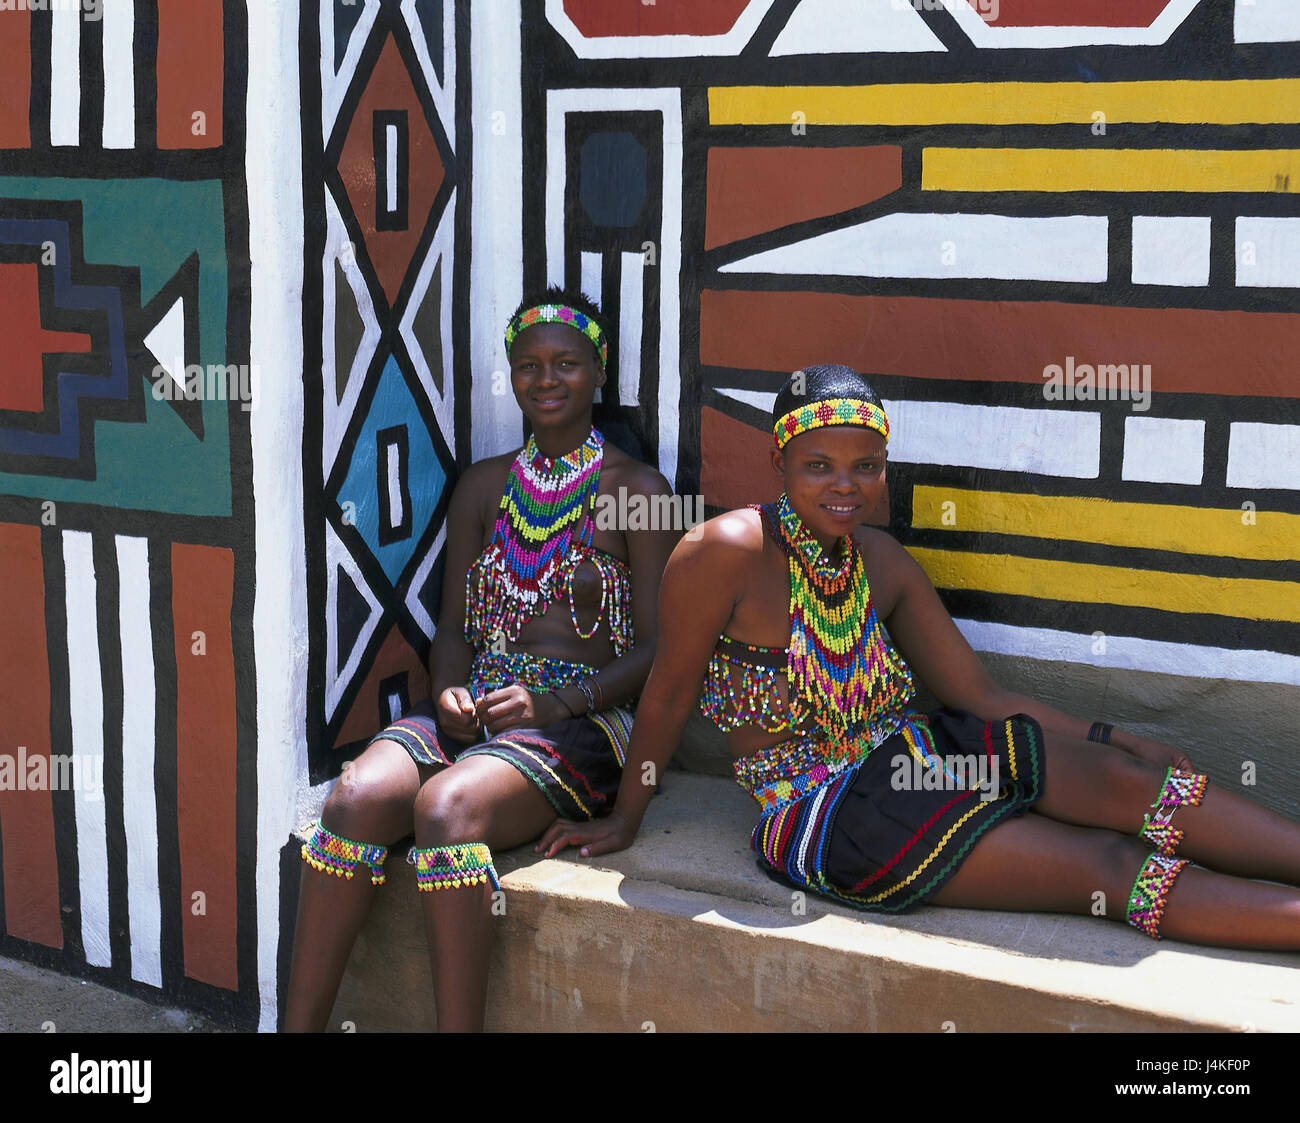 South Africa, Lesedi, defensive wall, paints, Zulu's women, folklore clothes no model release Africa, close Johannesburg, tribe, Zulu tribe, locals, non-whites, Africans, clothes, jewellery, tradition, culture, tourist attraction Stock Photo